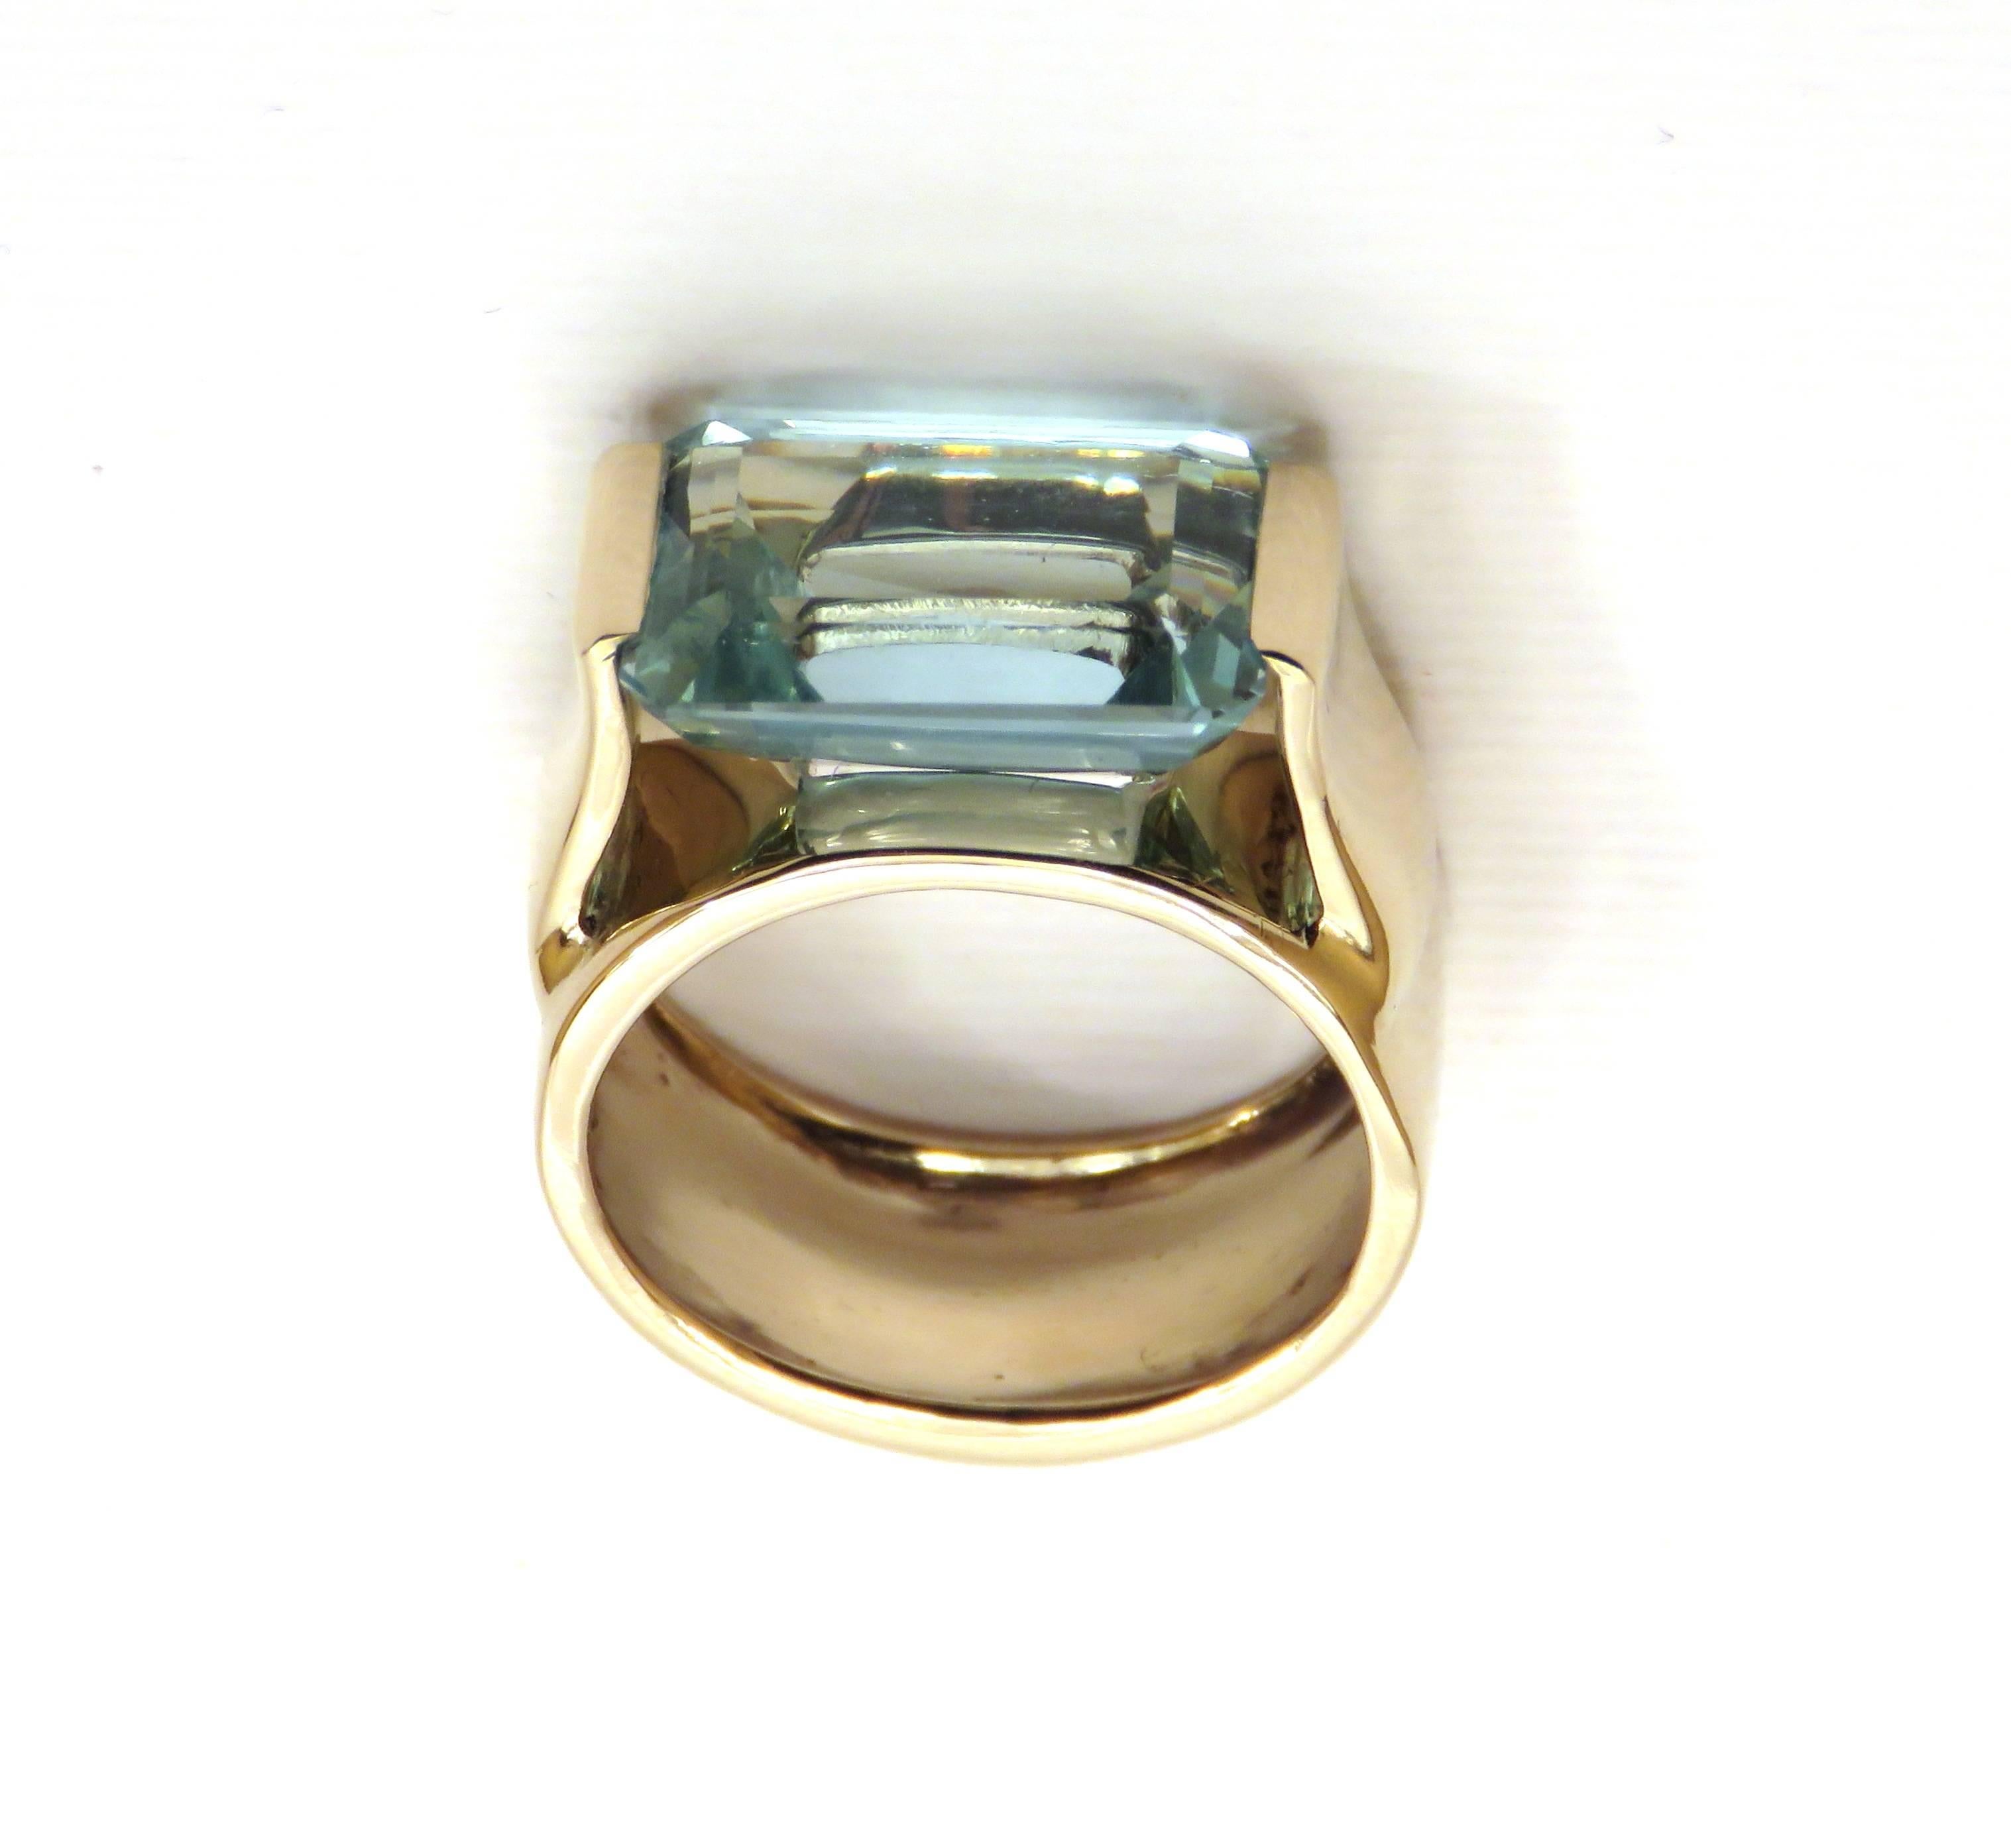 Women's Aquamarine White 18 Kt Gold Cocktail Ring Handcrafted in Italy by Botta Gioielli